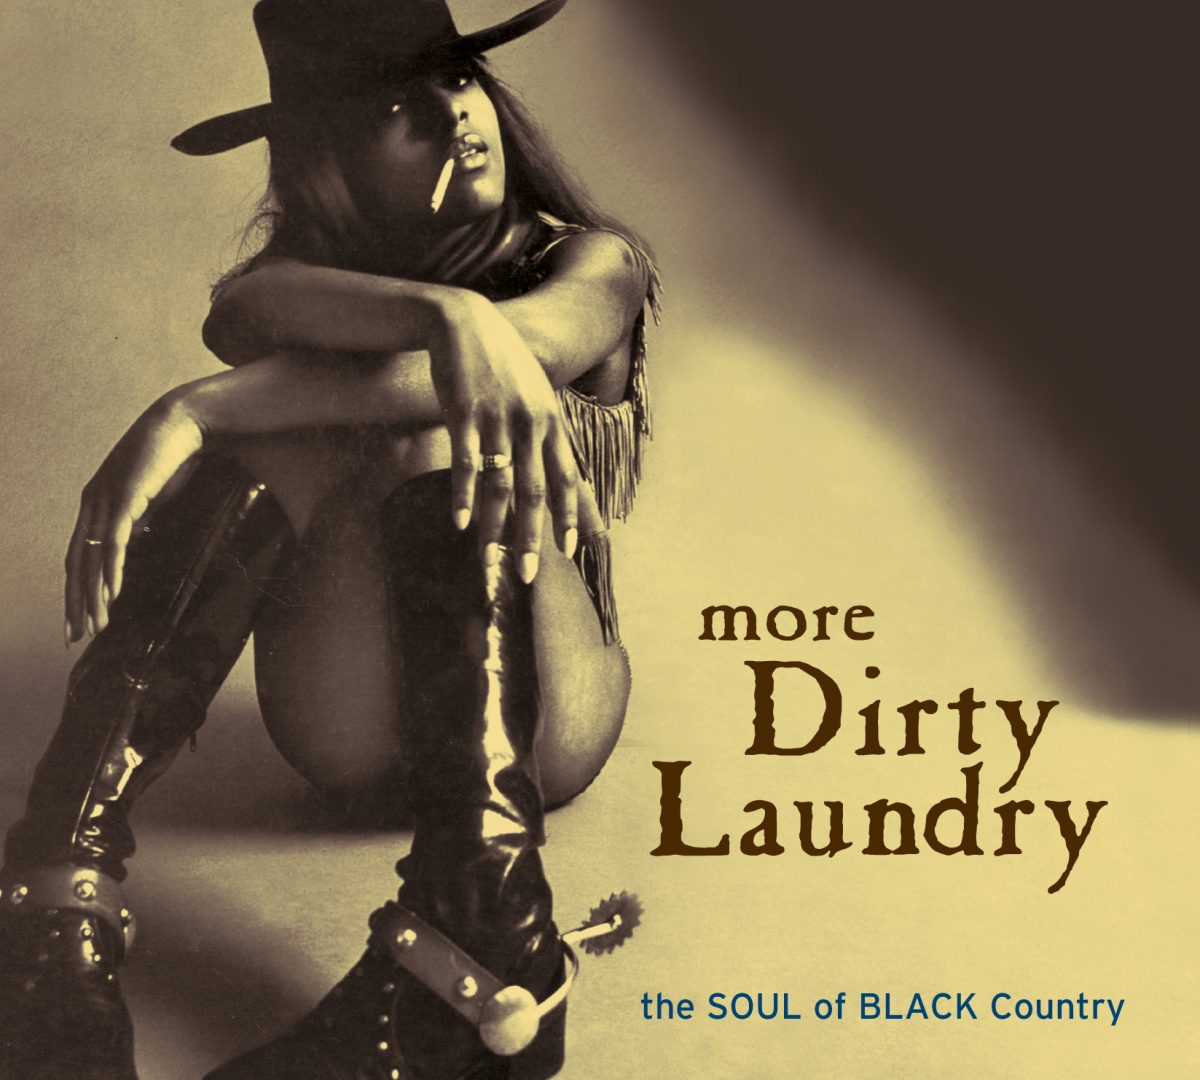 More Dirty Laundry - The Soul of Black Country